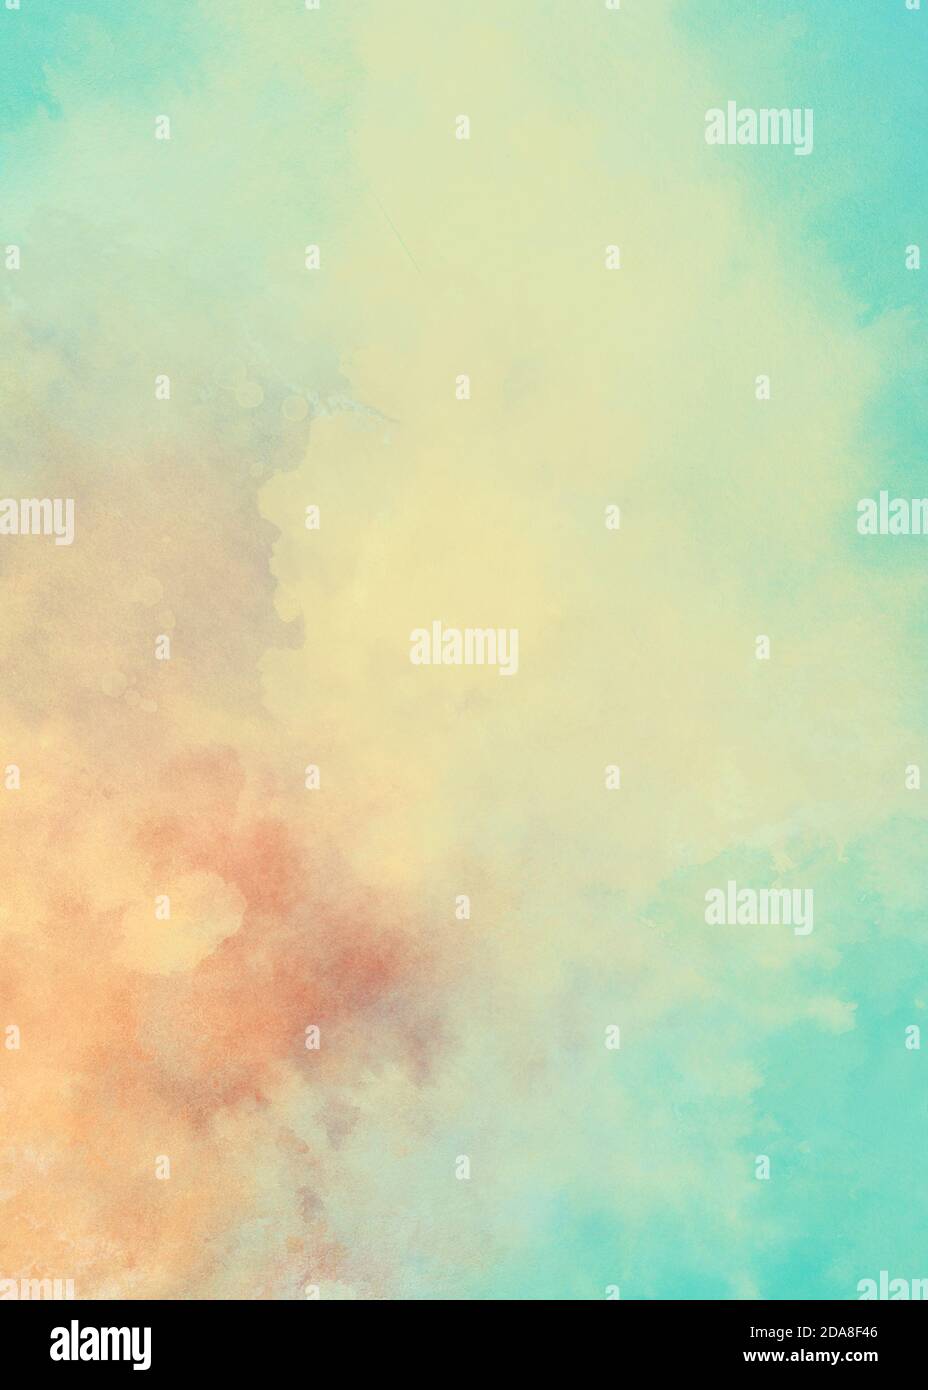 Blue white and orange watercolor background illustration in soft pastel colors and abstract blotches and paint spatter design Stock Photo